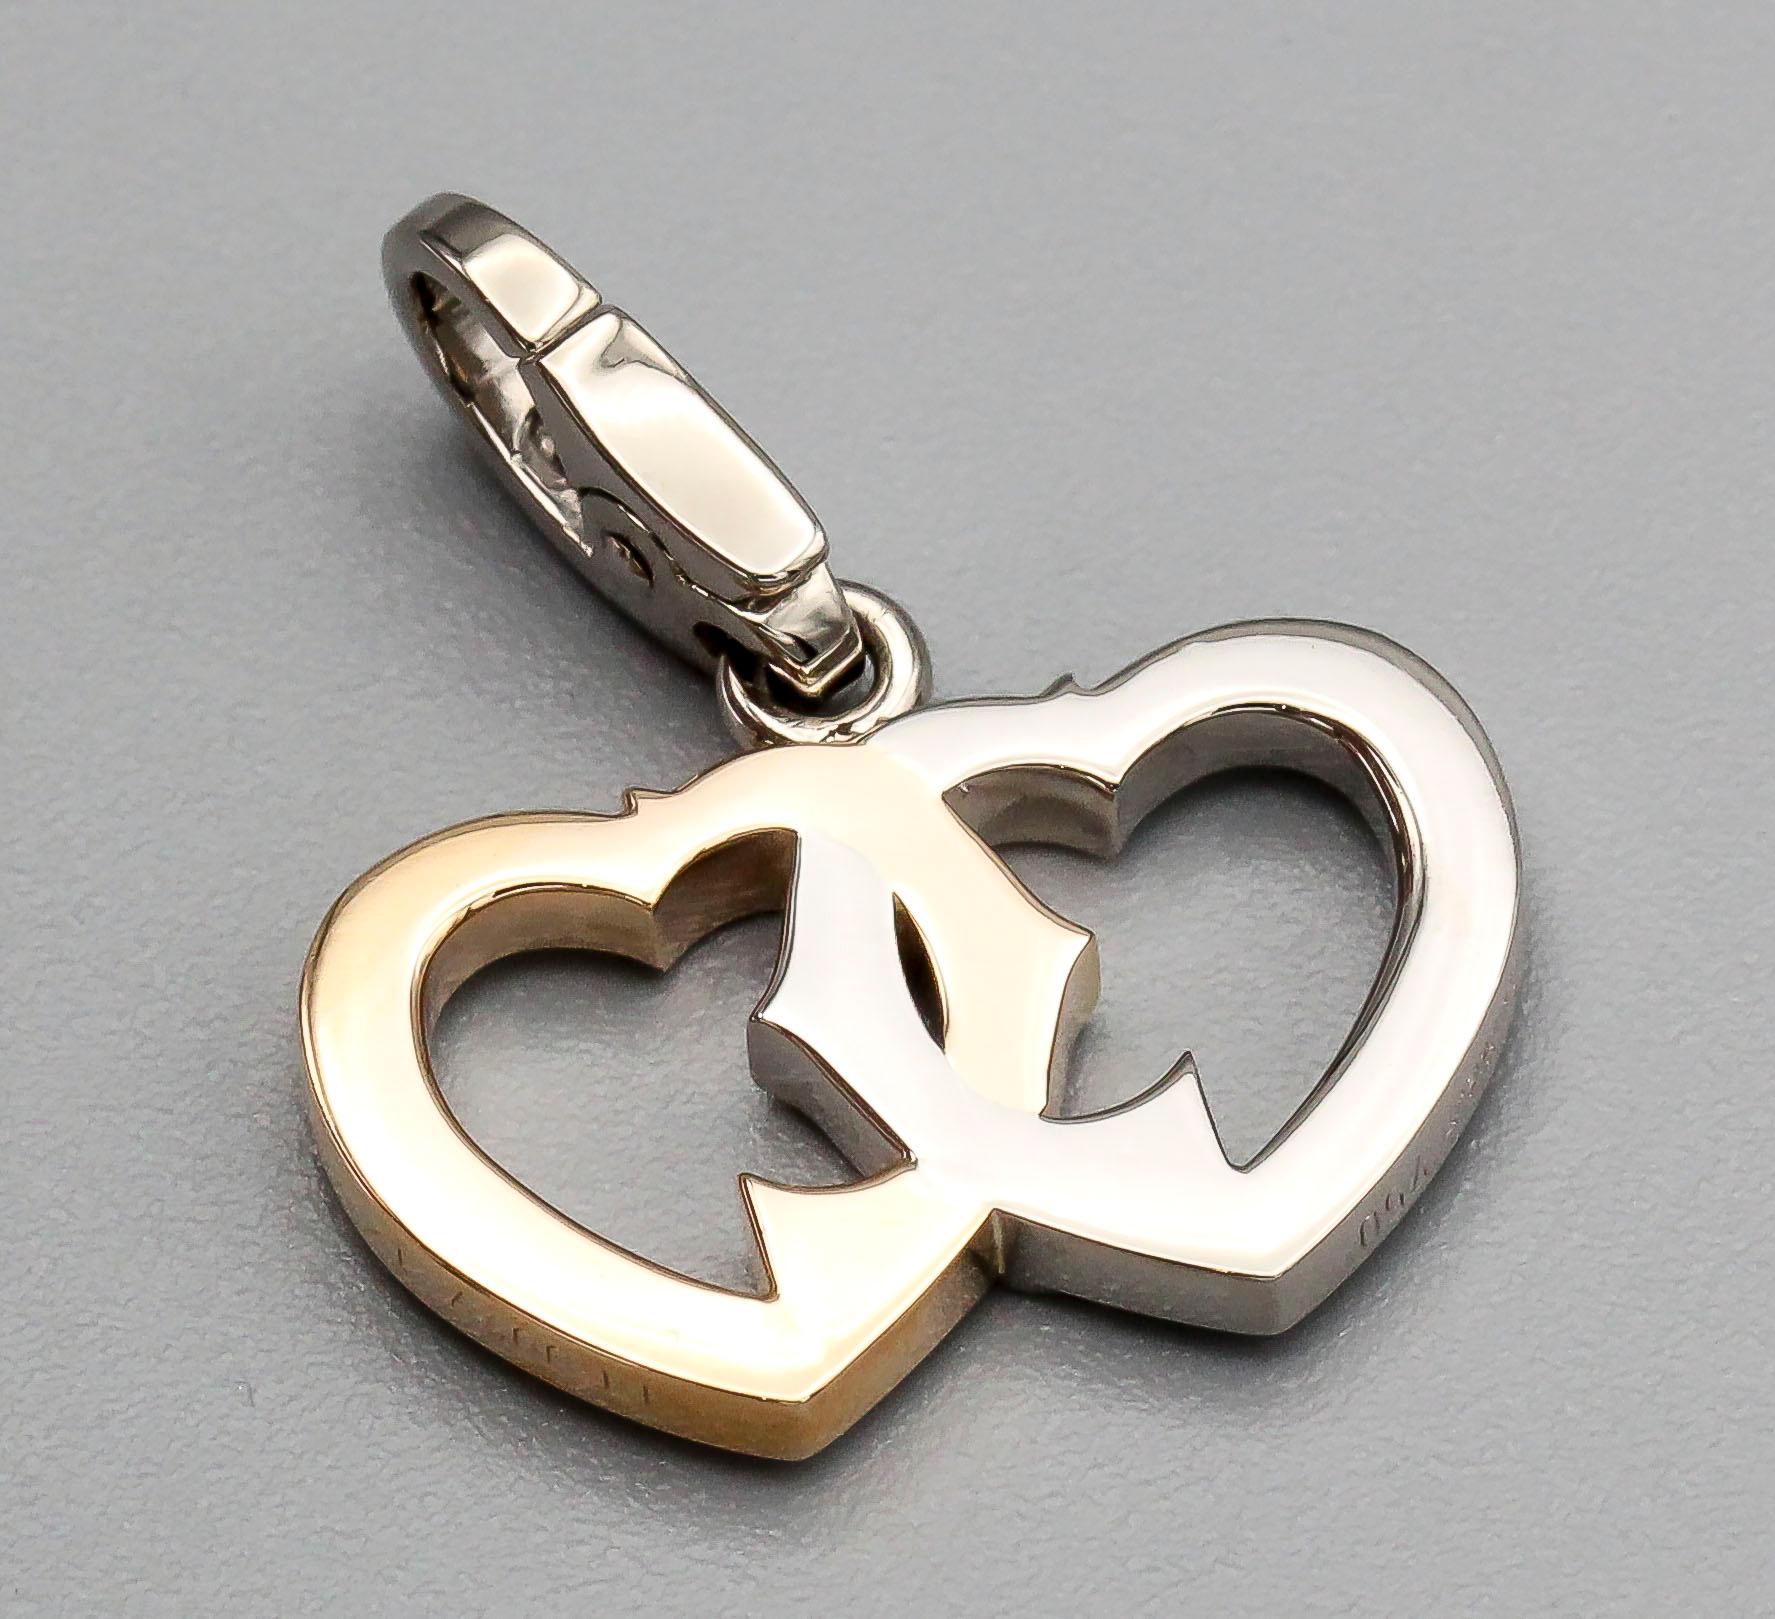 Fine 18k yellow and white gold interwined double heart logo charm by Cartier.

Hallmarks: Cartier, 750, reference numbers, maker's mark.